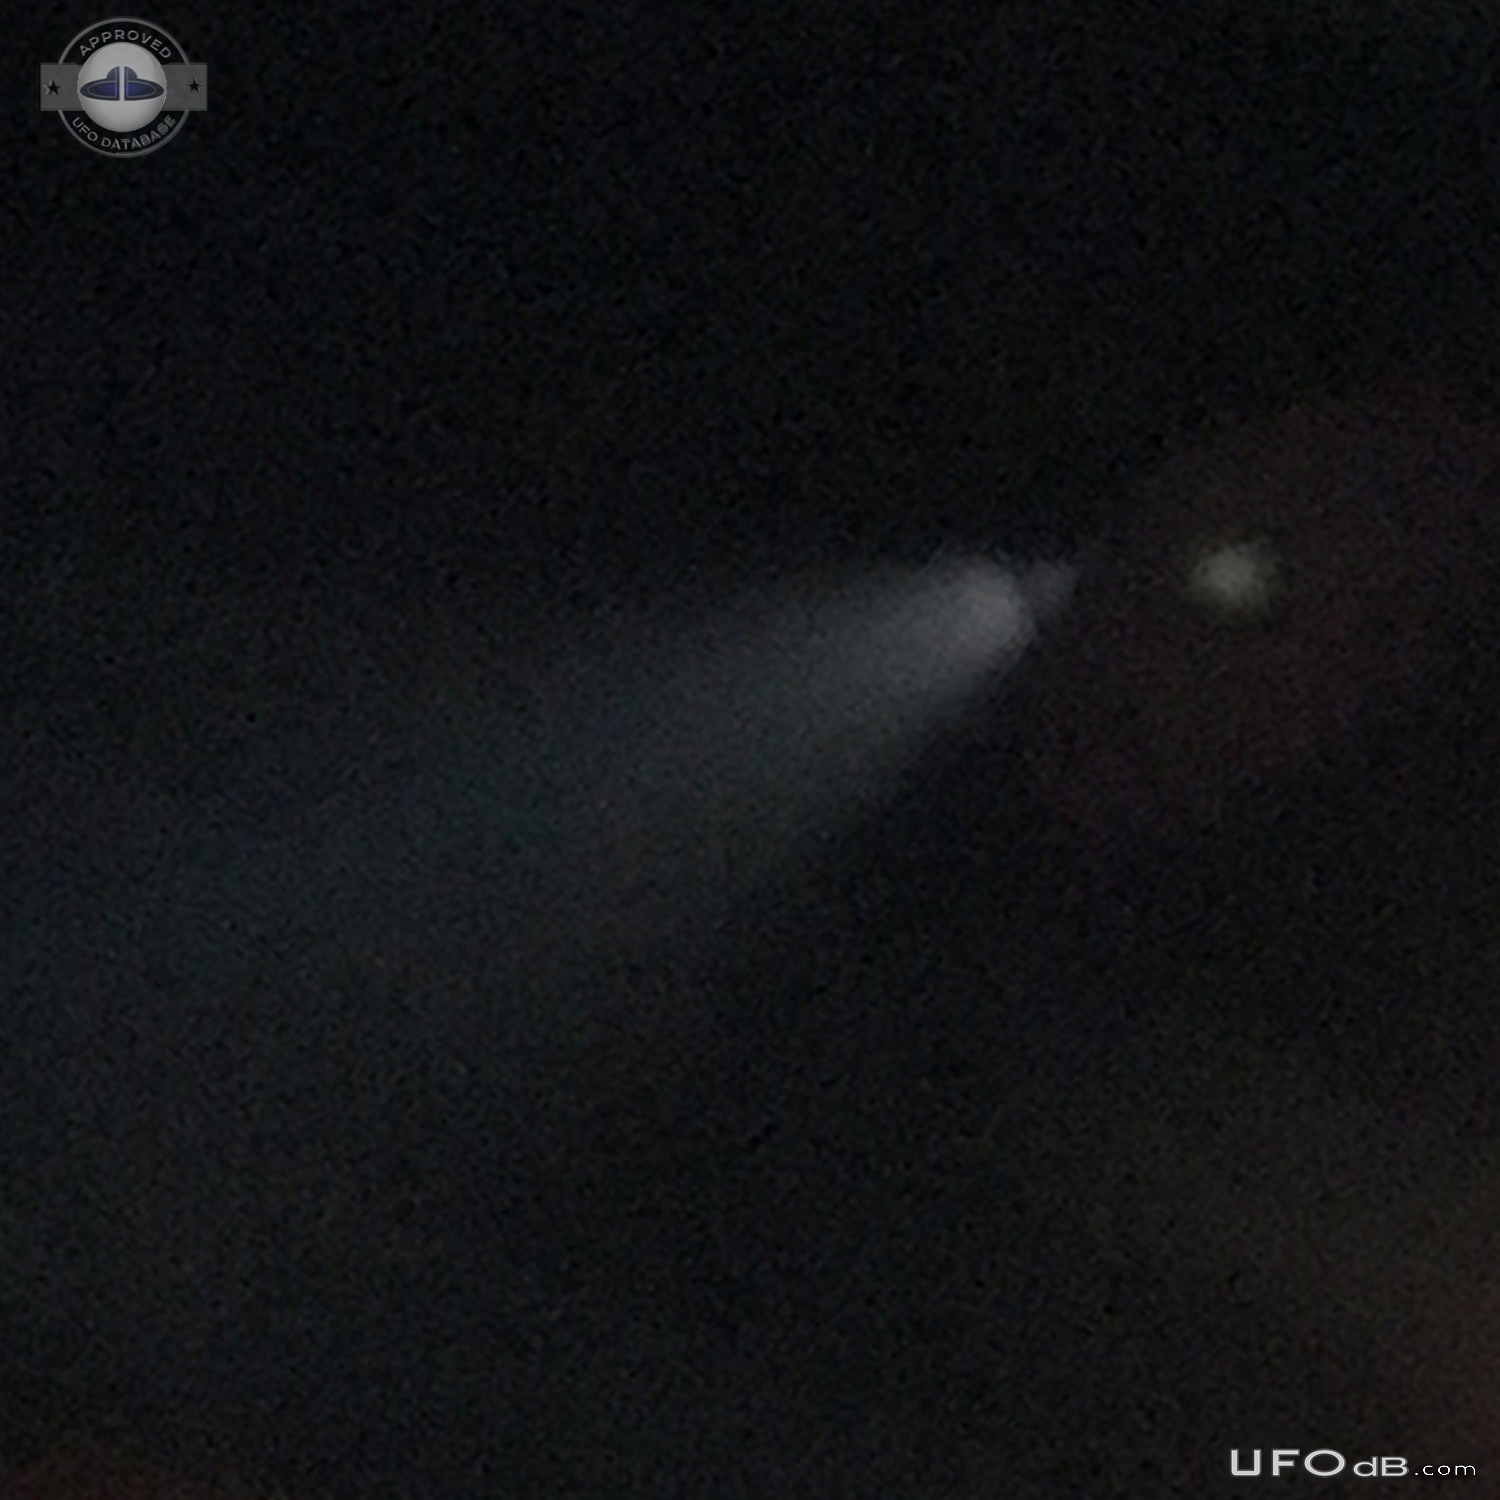 Coming out of my house saw UFO in the sky with a long beam of light -  UFO Picture #758-4